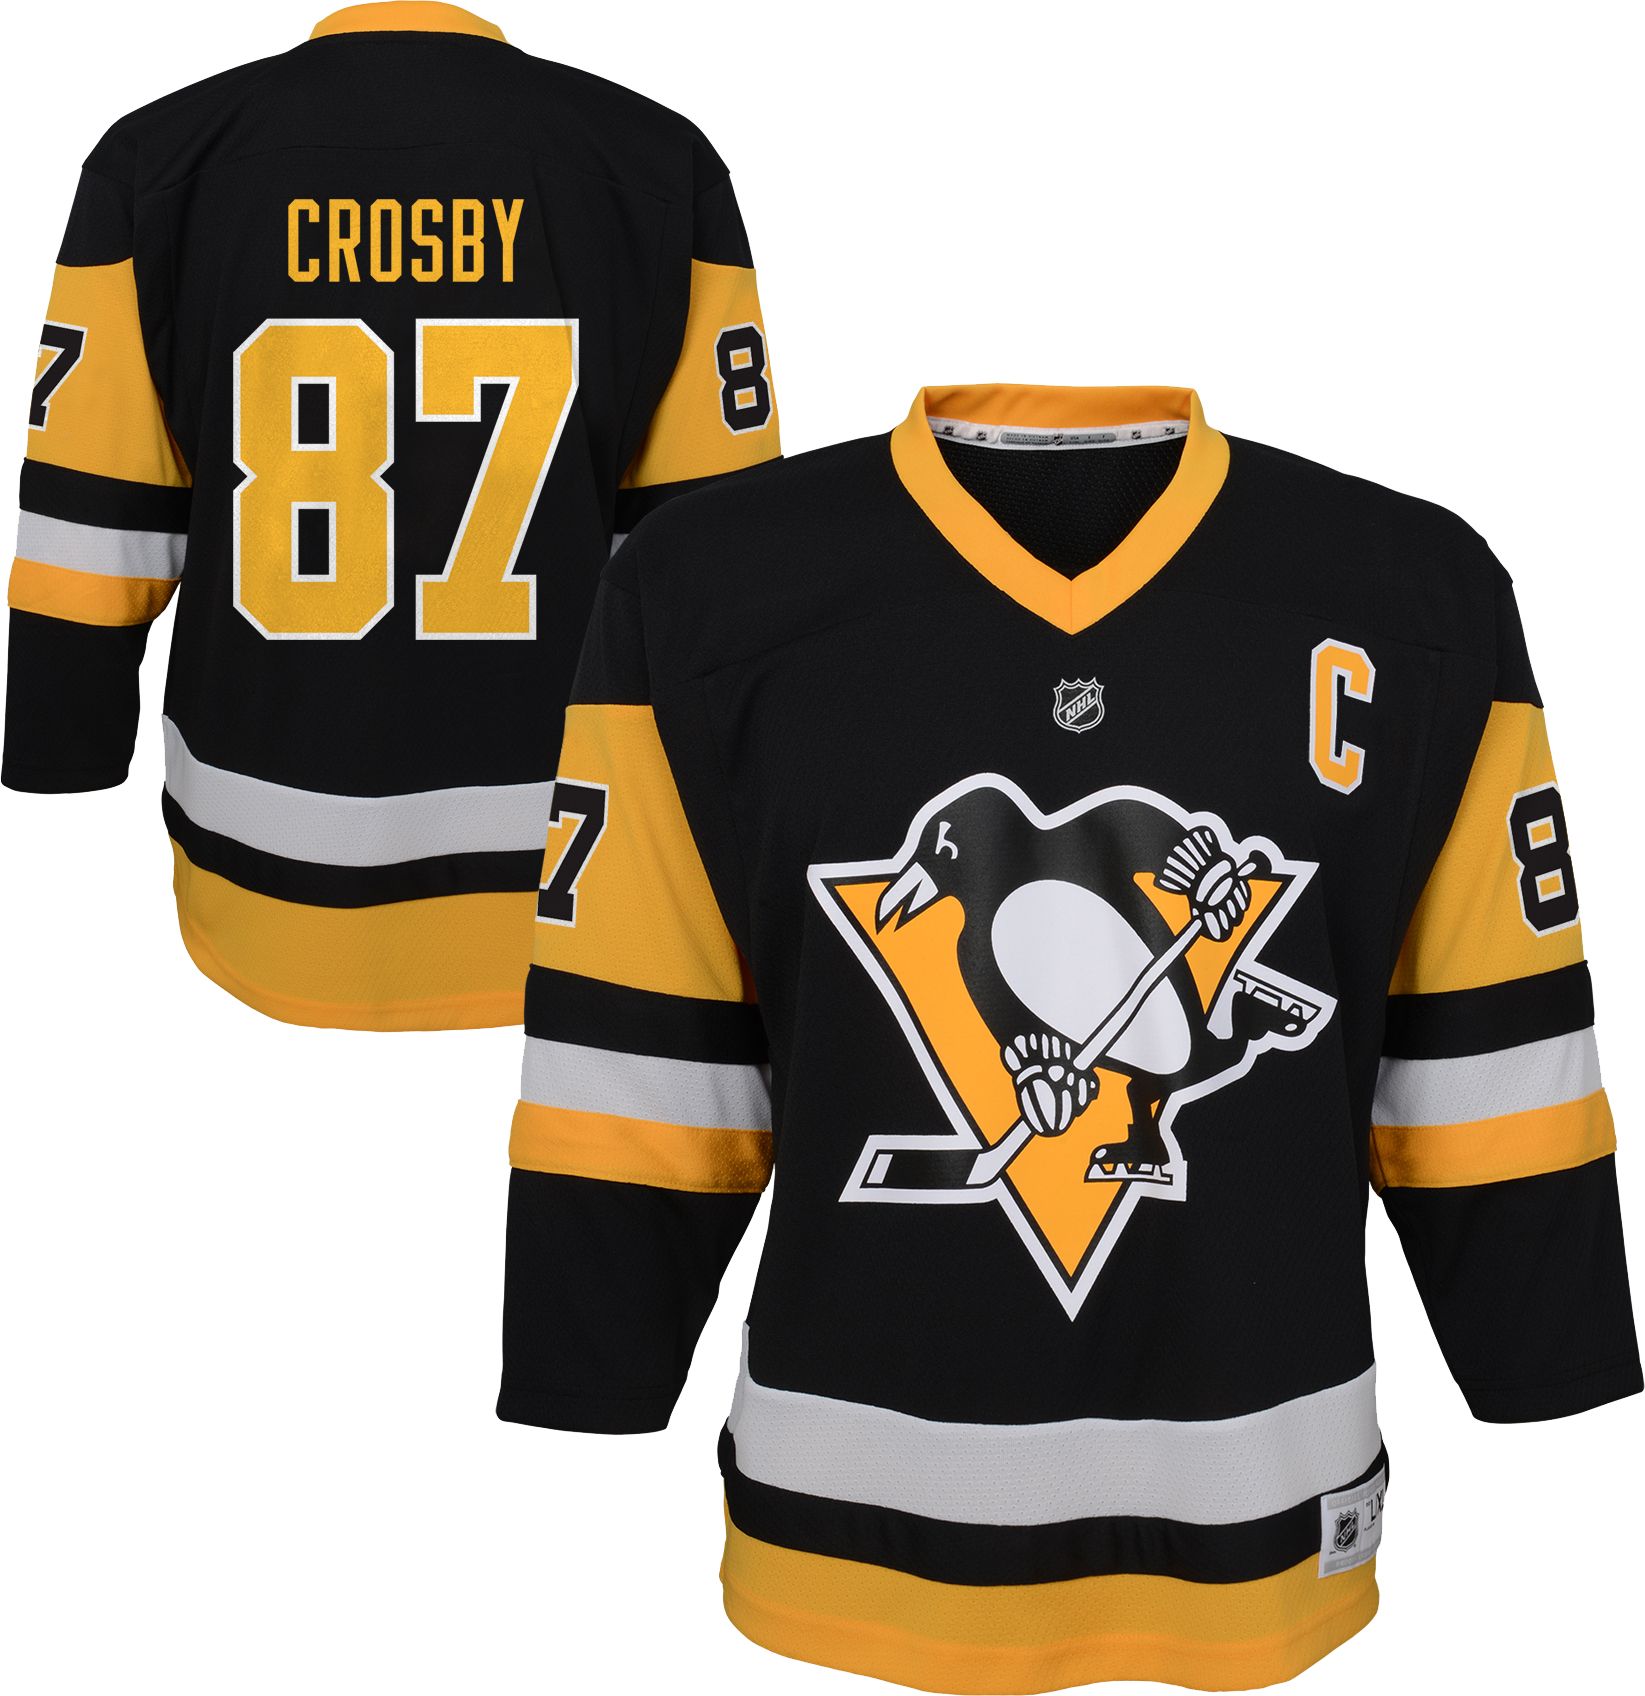 sidney crosby home jersey